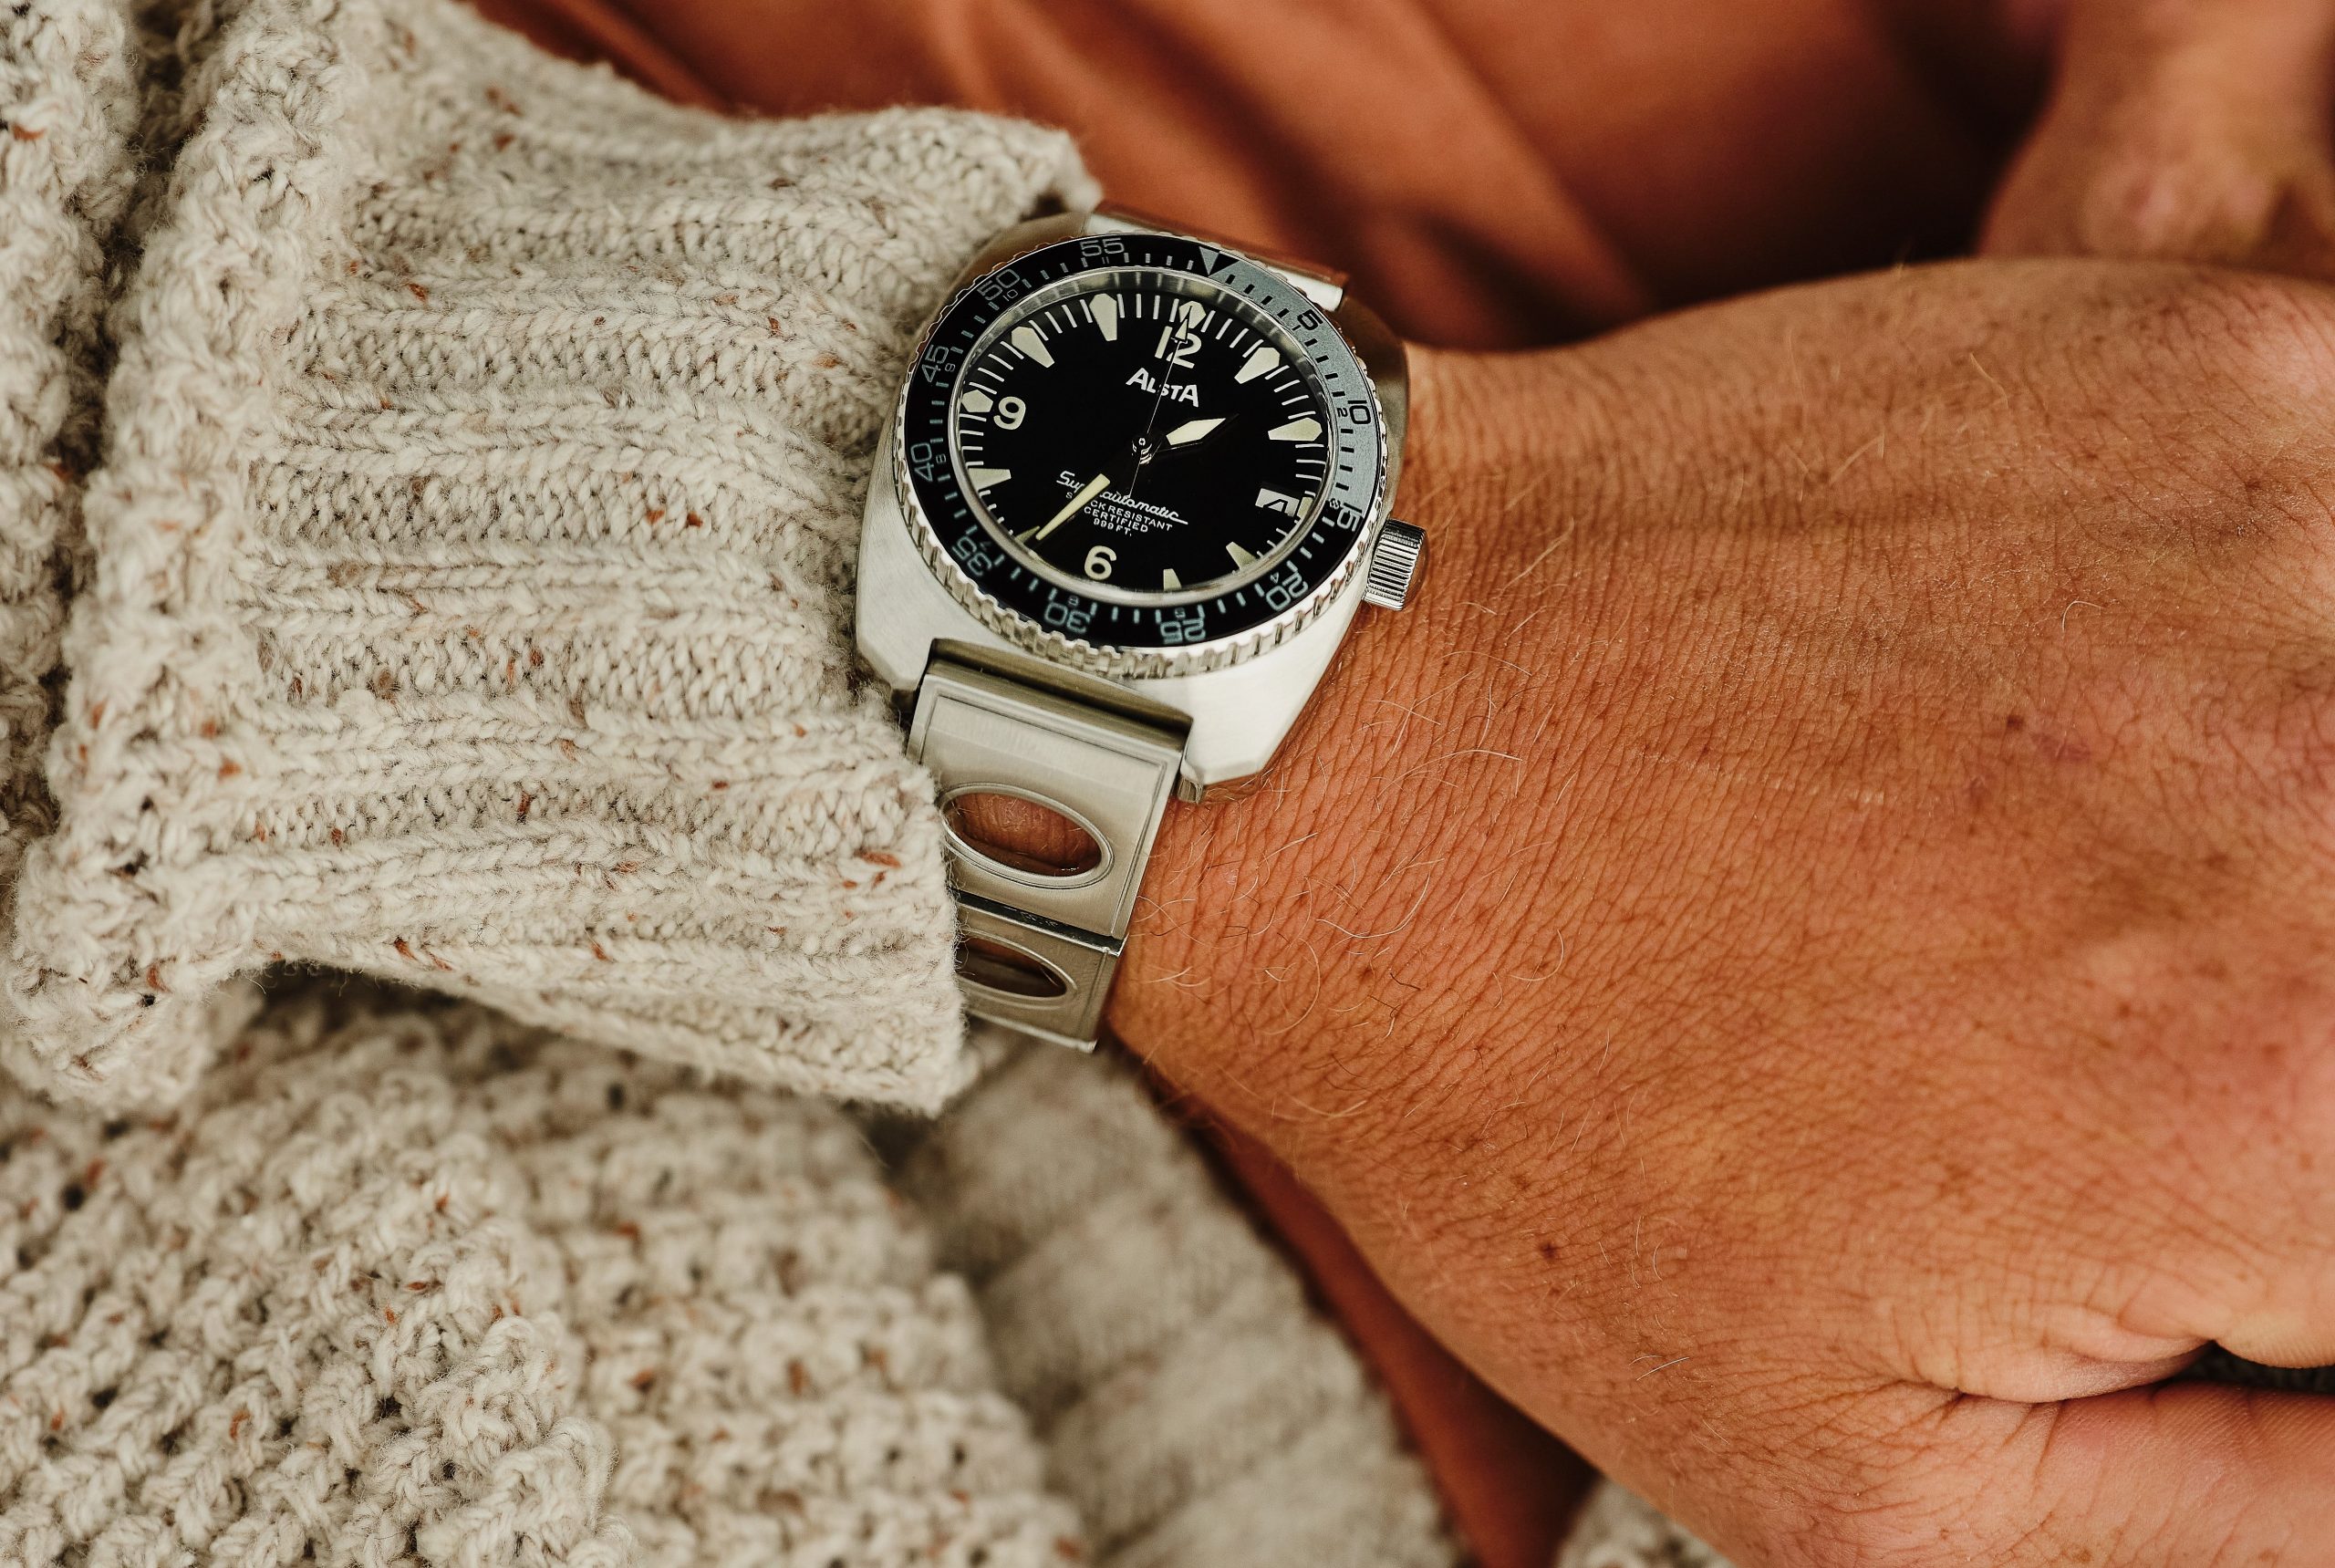 6 of the best adventure watches for men | The Coolector